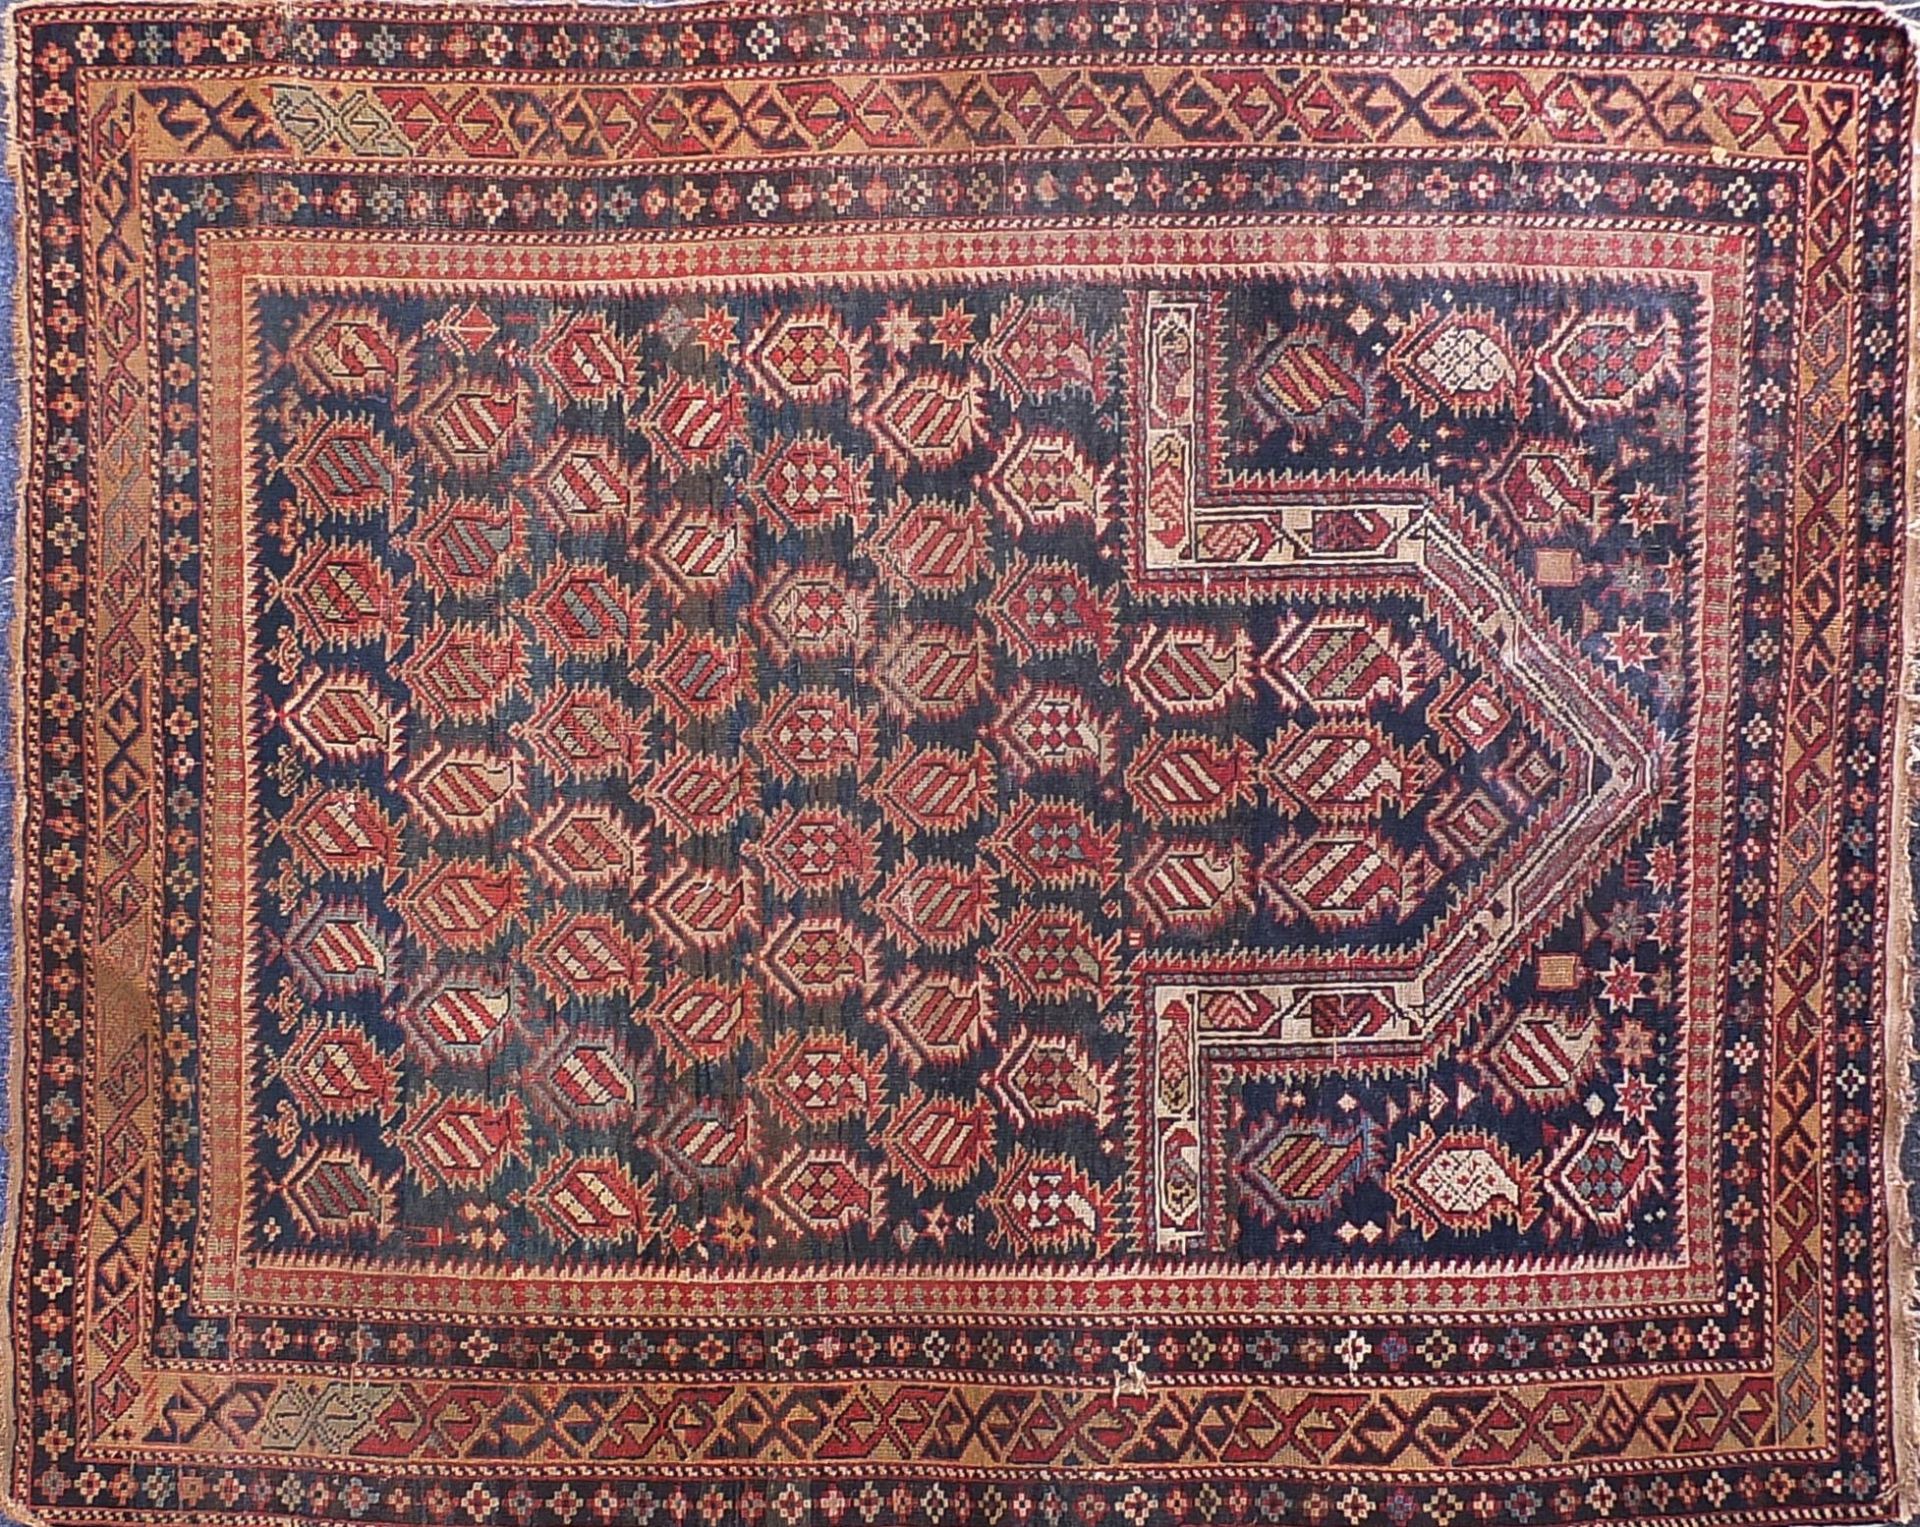 Middle Eastern prayer rug decorated with floral motifs, 142cm x 118cm